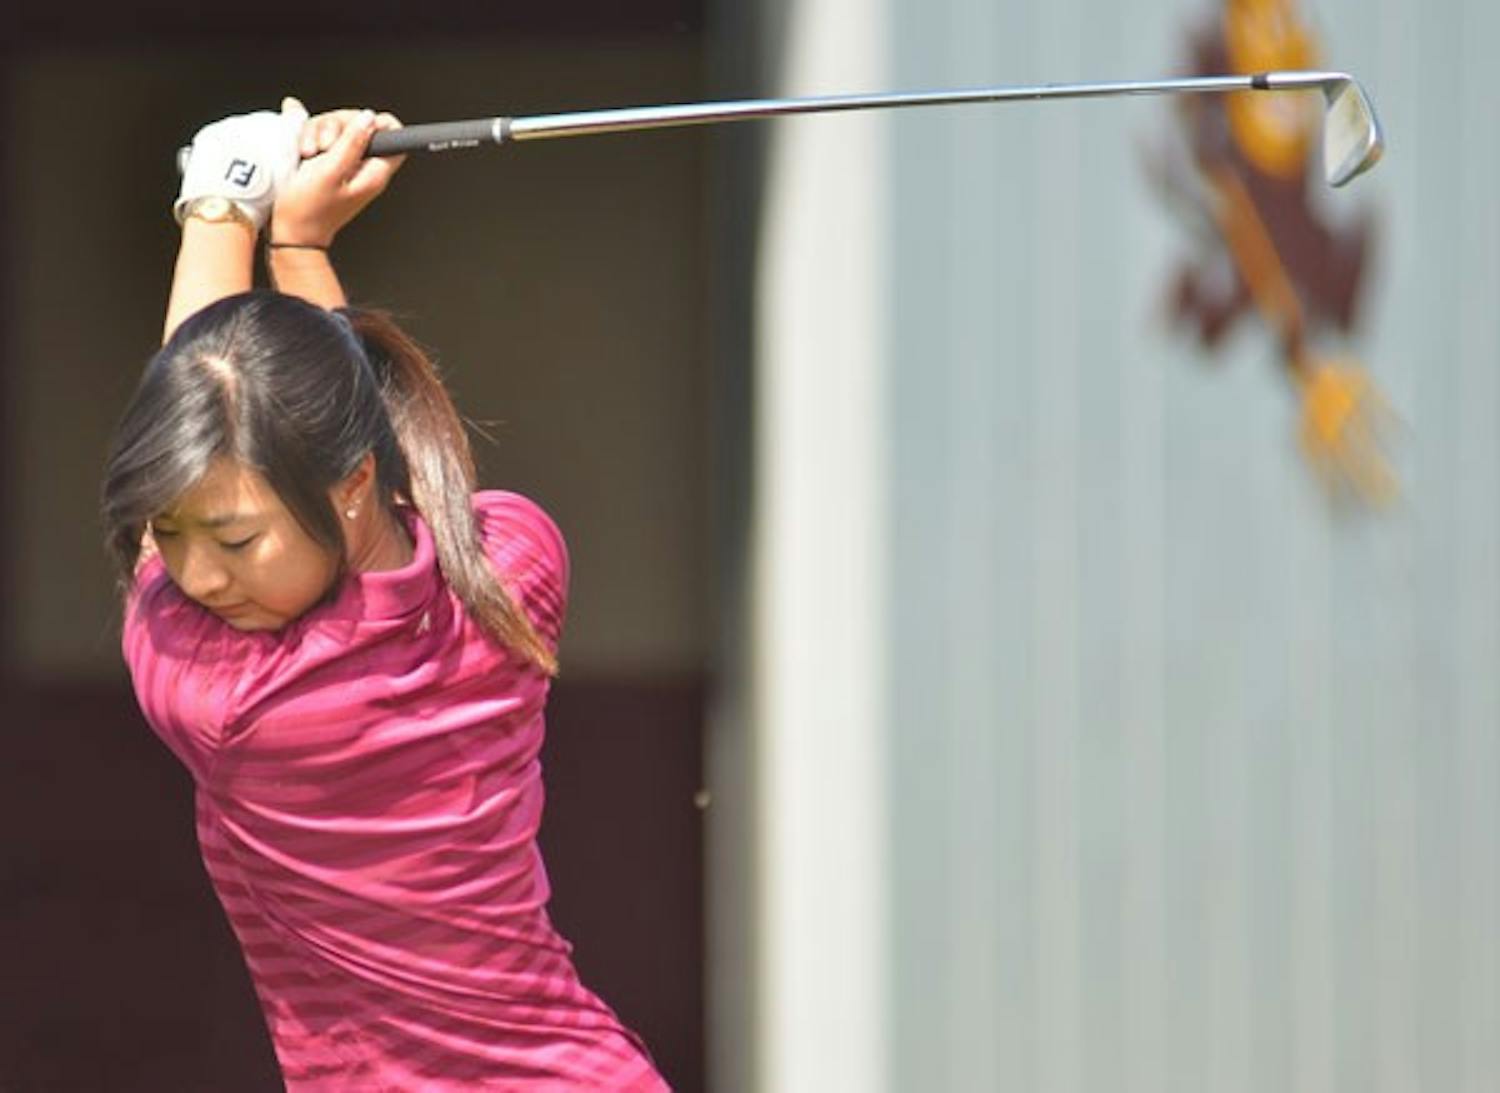 Home-course advantage: ASU freshman Justine Lee starts her downswing during a practice earlier this season. The Sun Devils are hosting the Pac-10 Championships this weekend and are hoping to make a move for the title. (Photo by Aaron Lavinsky)